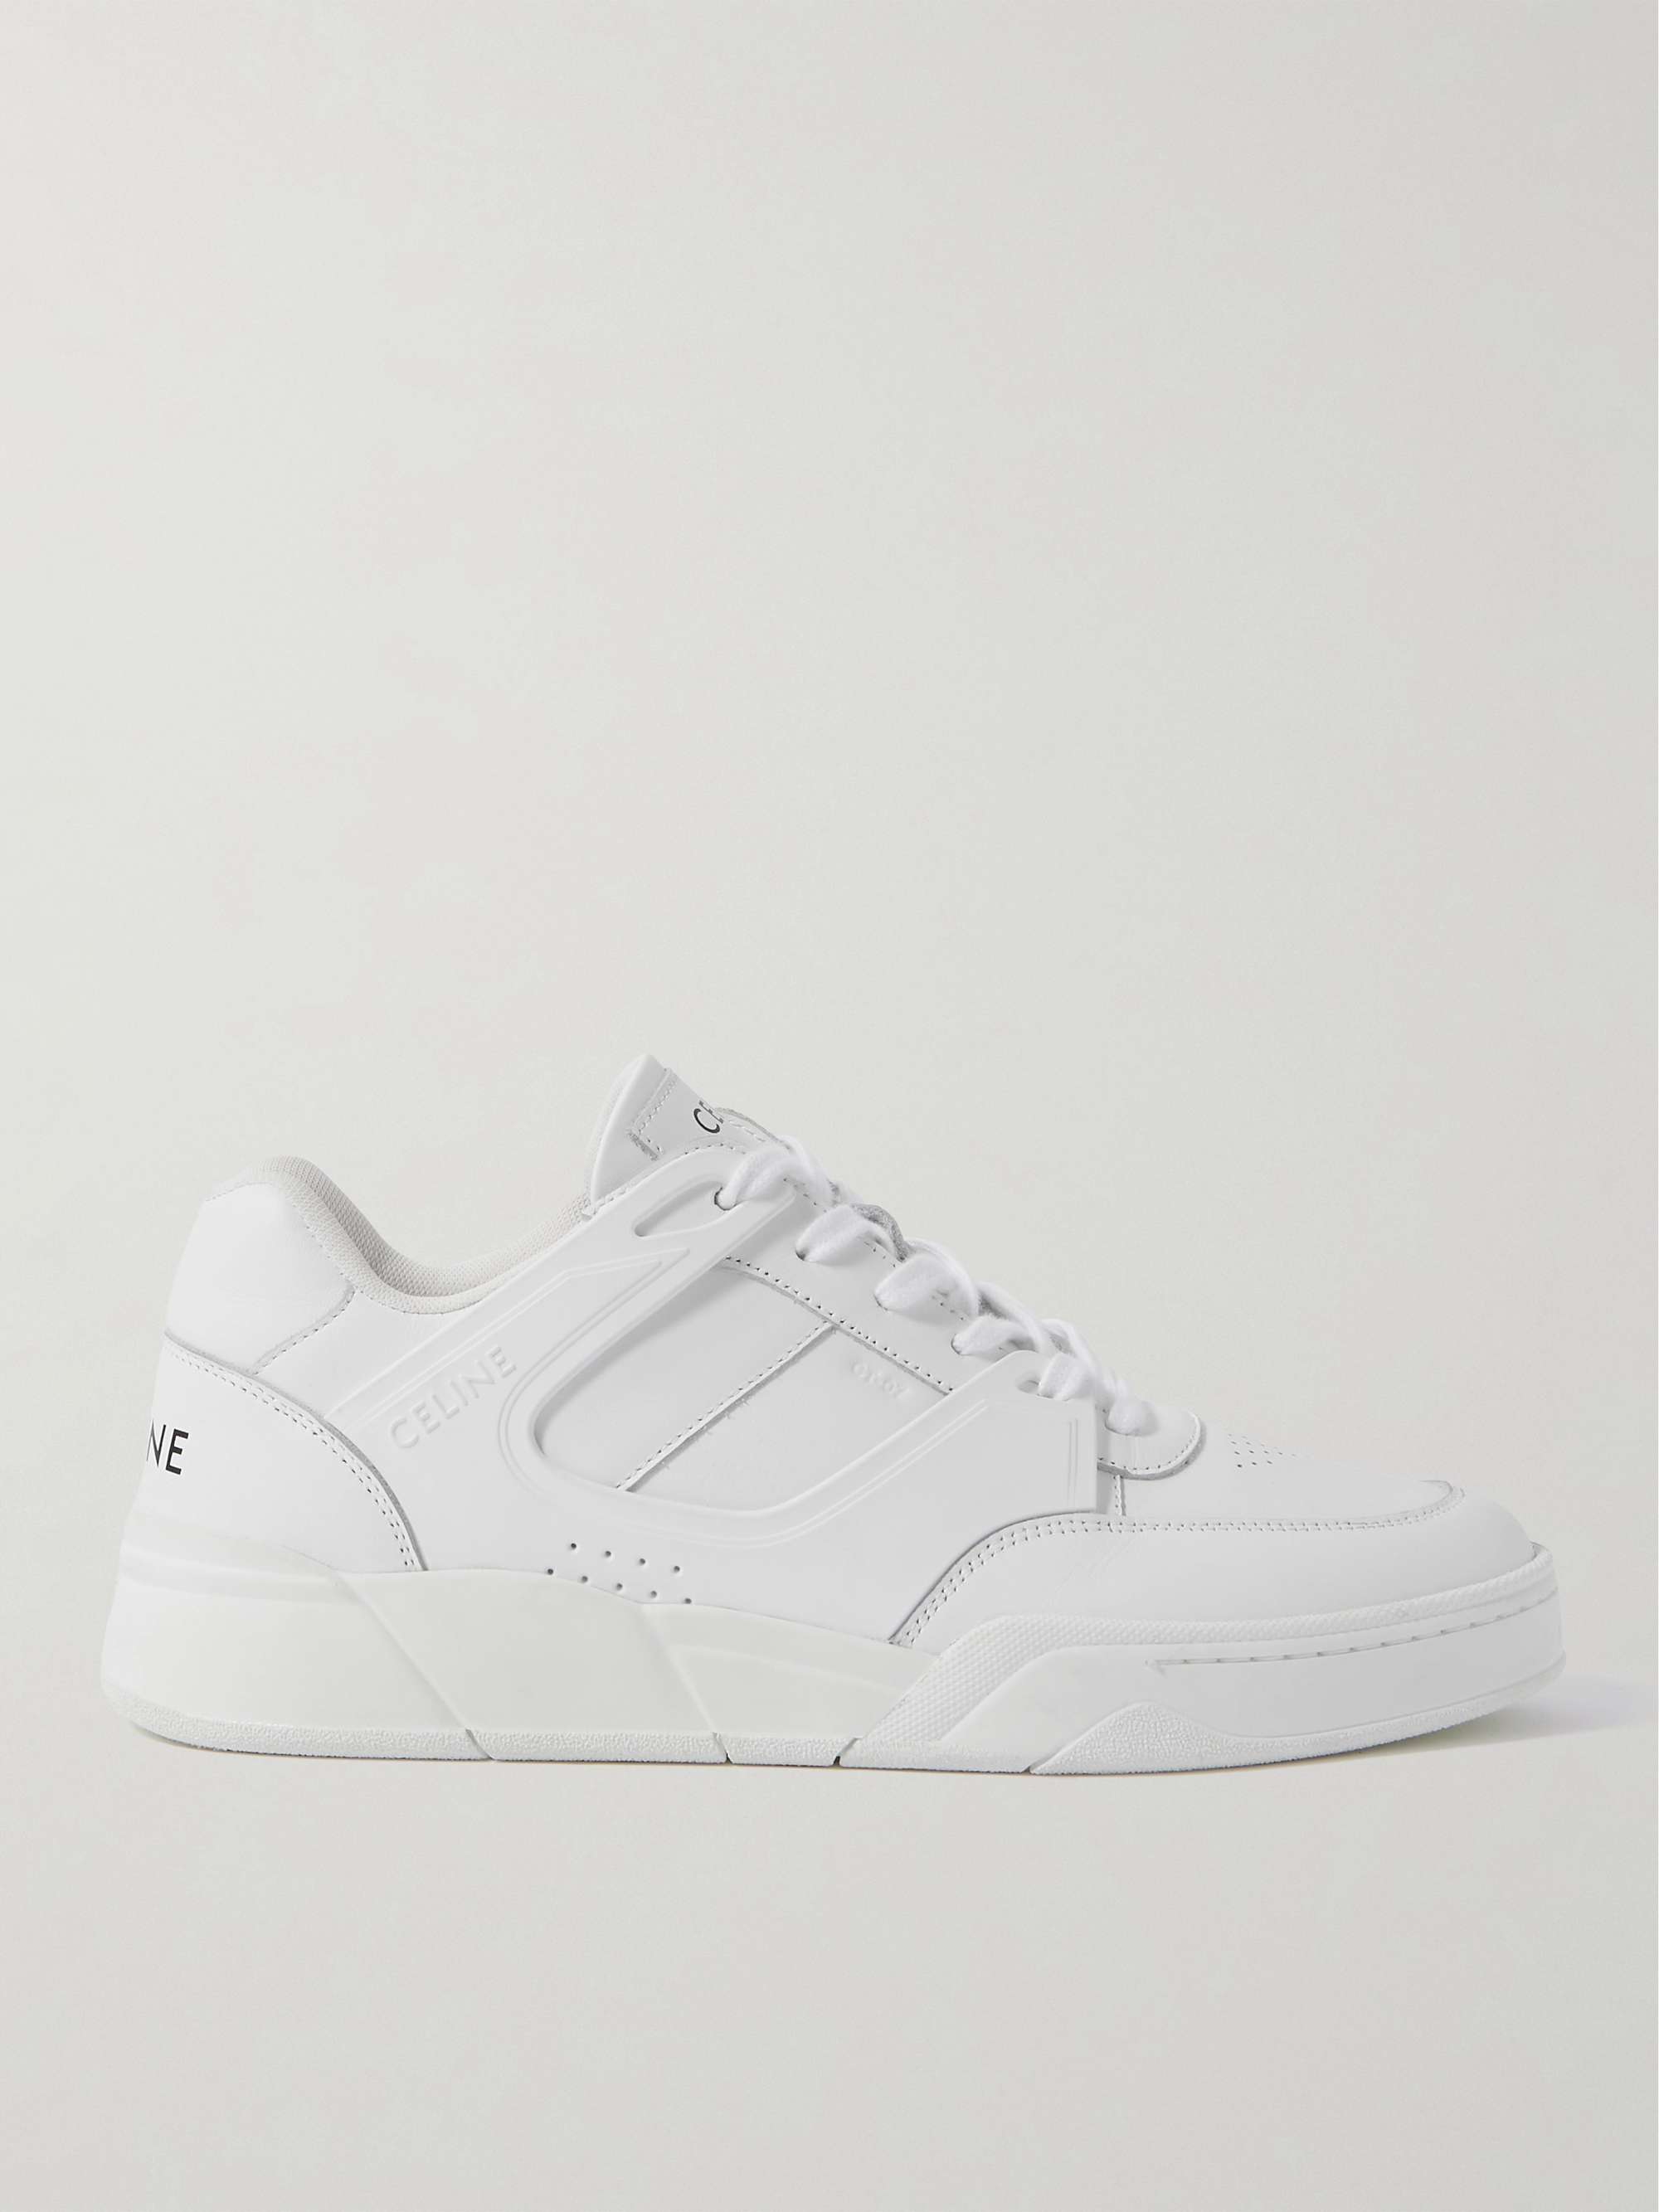 CELINE HOMME CT-07 Rubber-Trimmed Leather Sneakers